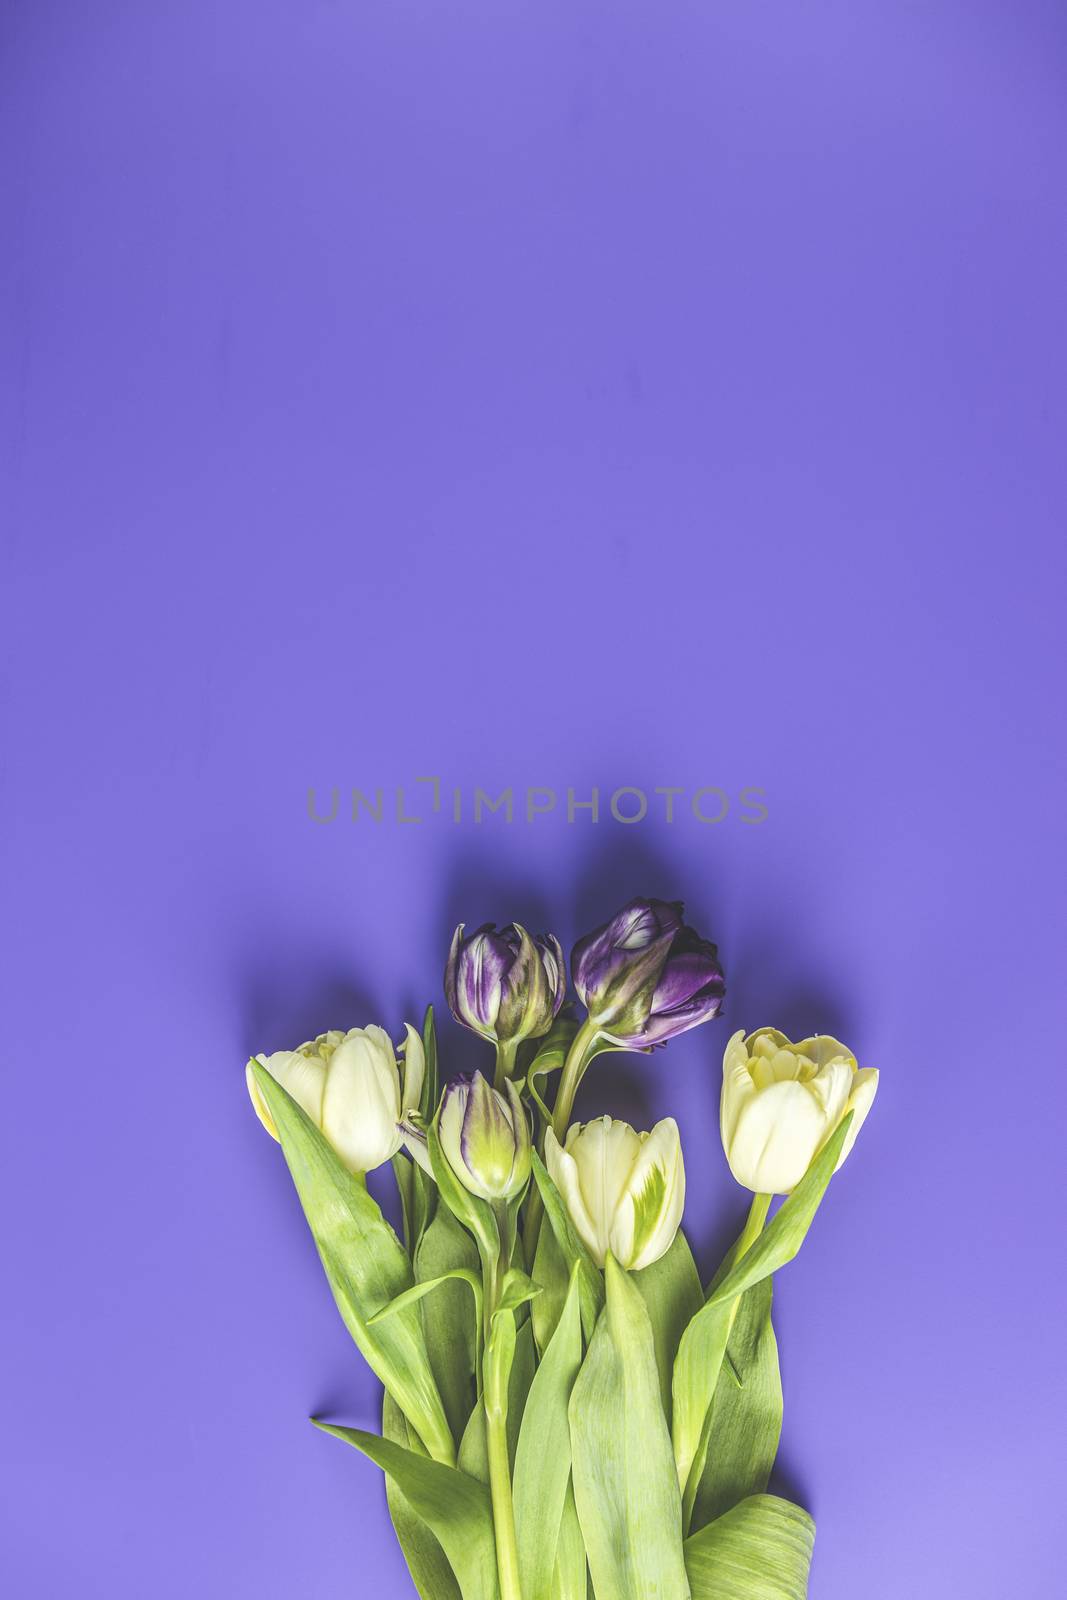 Flowers composition. Violet and light yellow tulip flowers on vi by ArtSvitlyna